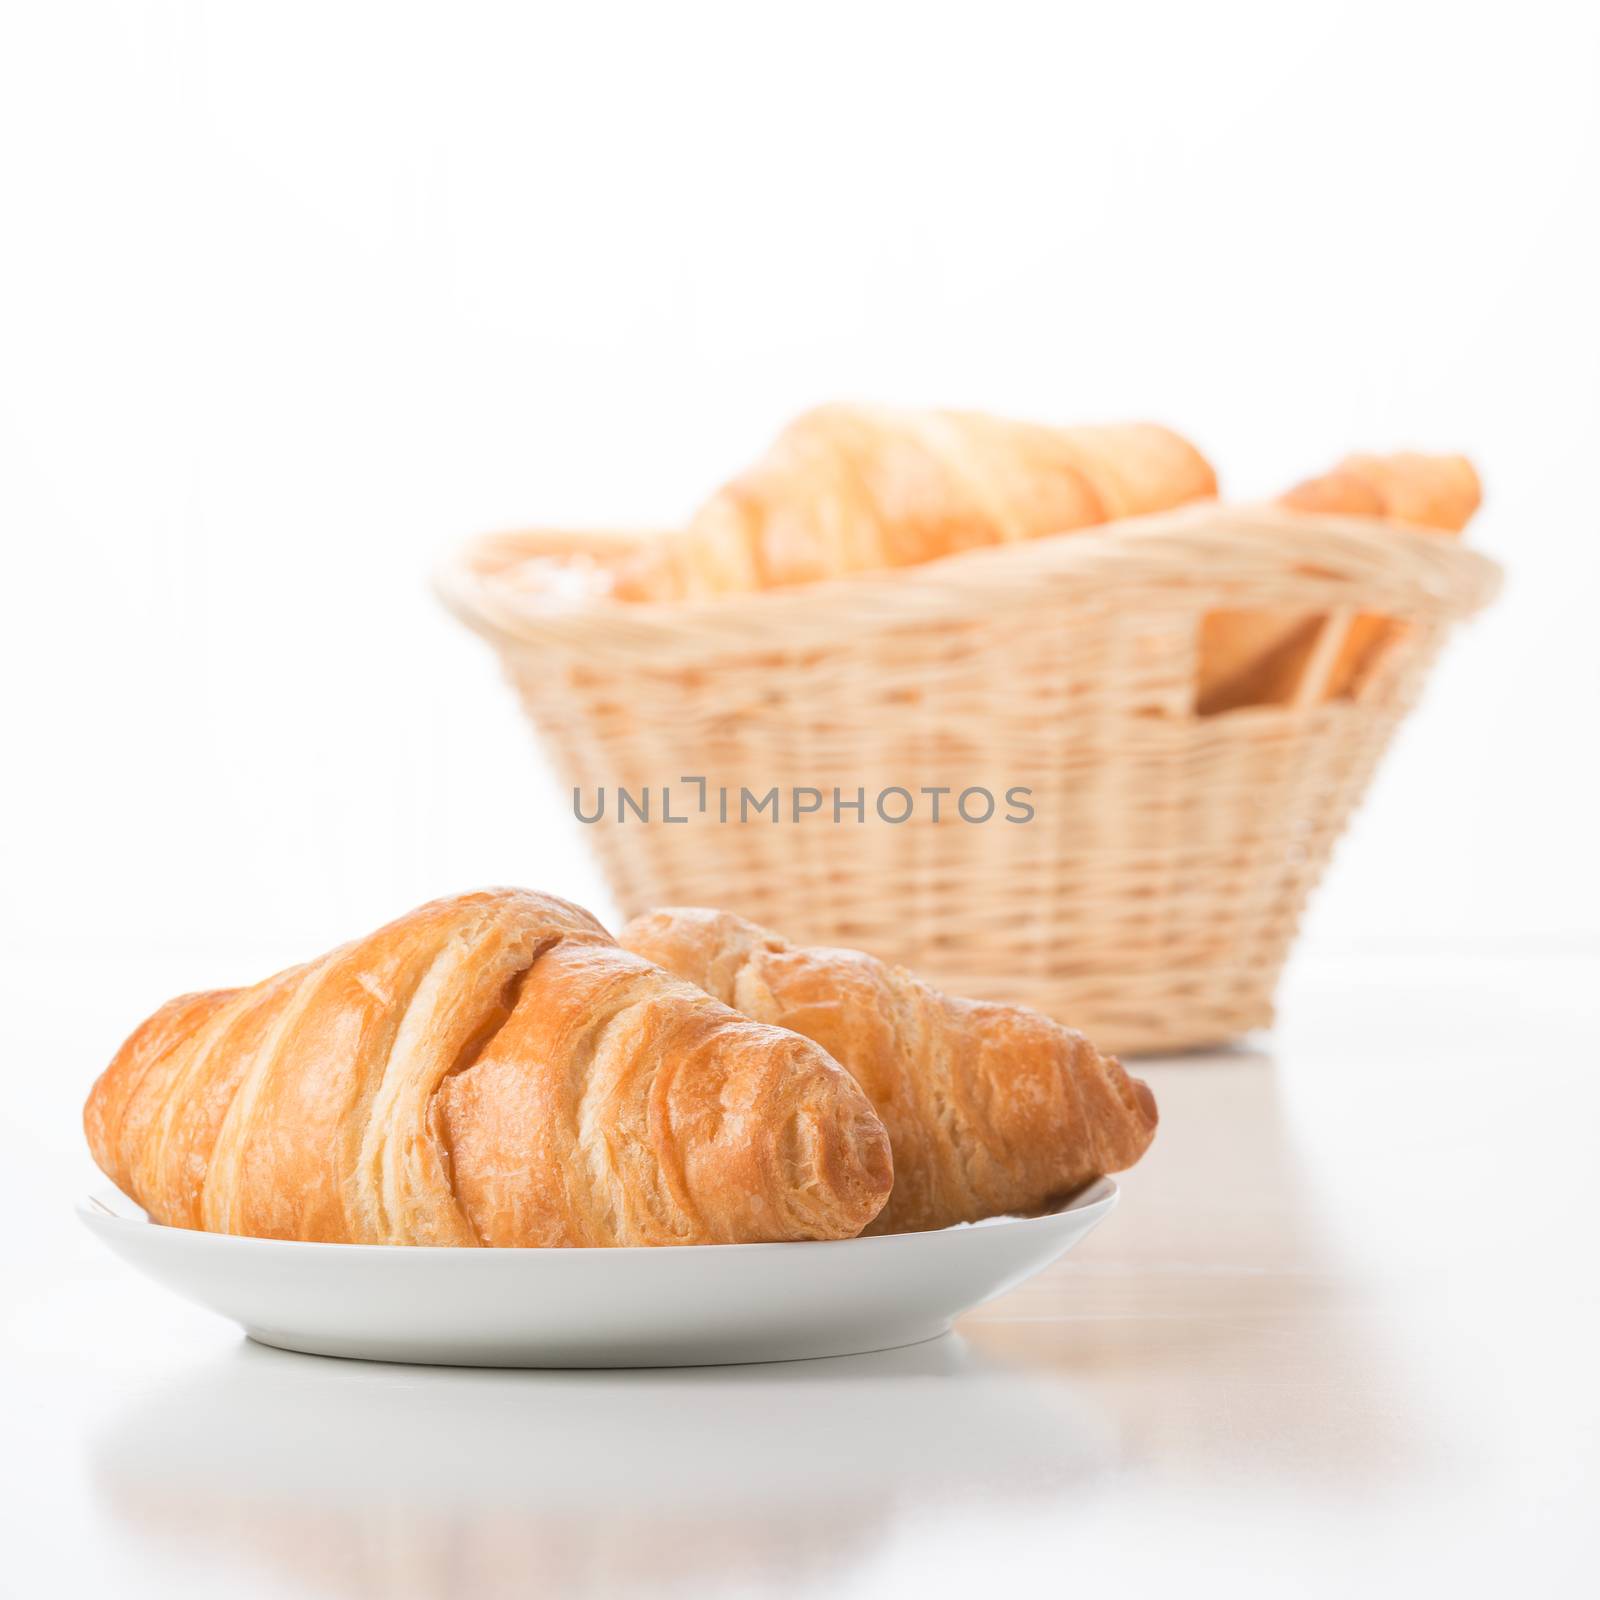 Fresh baked croissants against a white background.